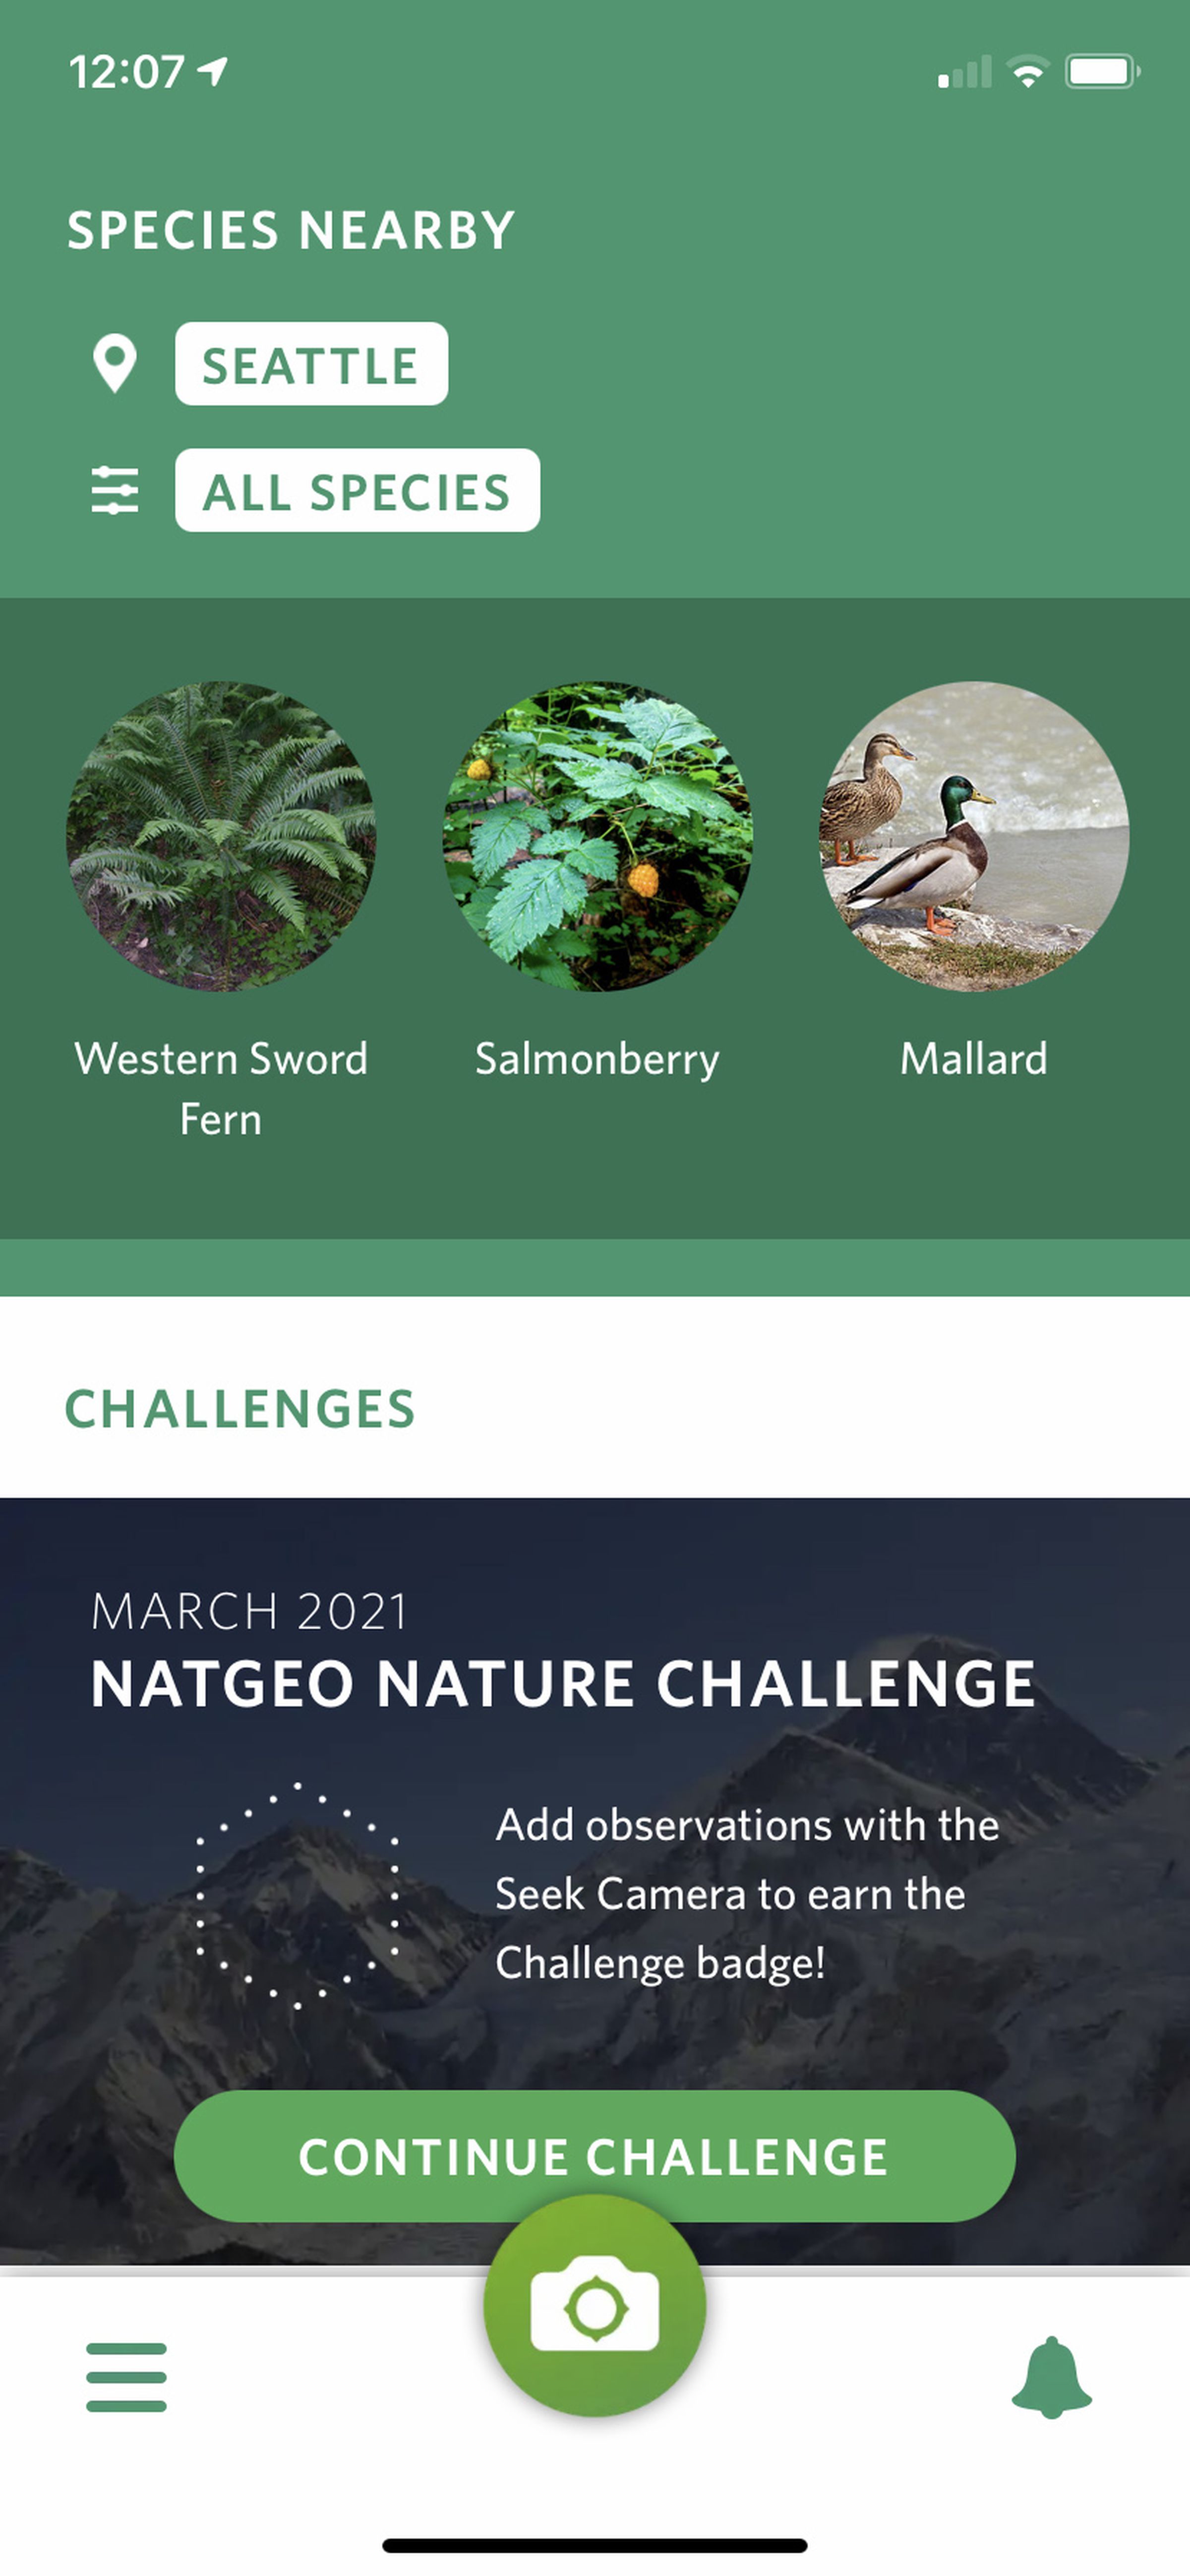 Seek helps you identify local animals and plant life, rewarding you with badges as you observe more species.